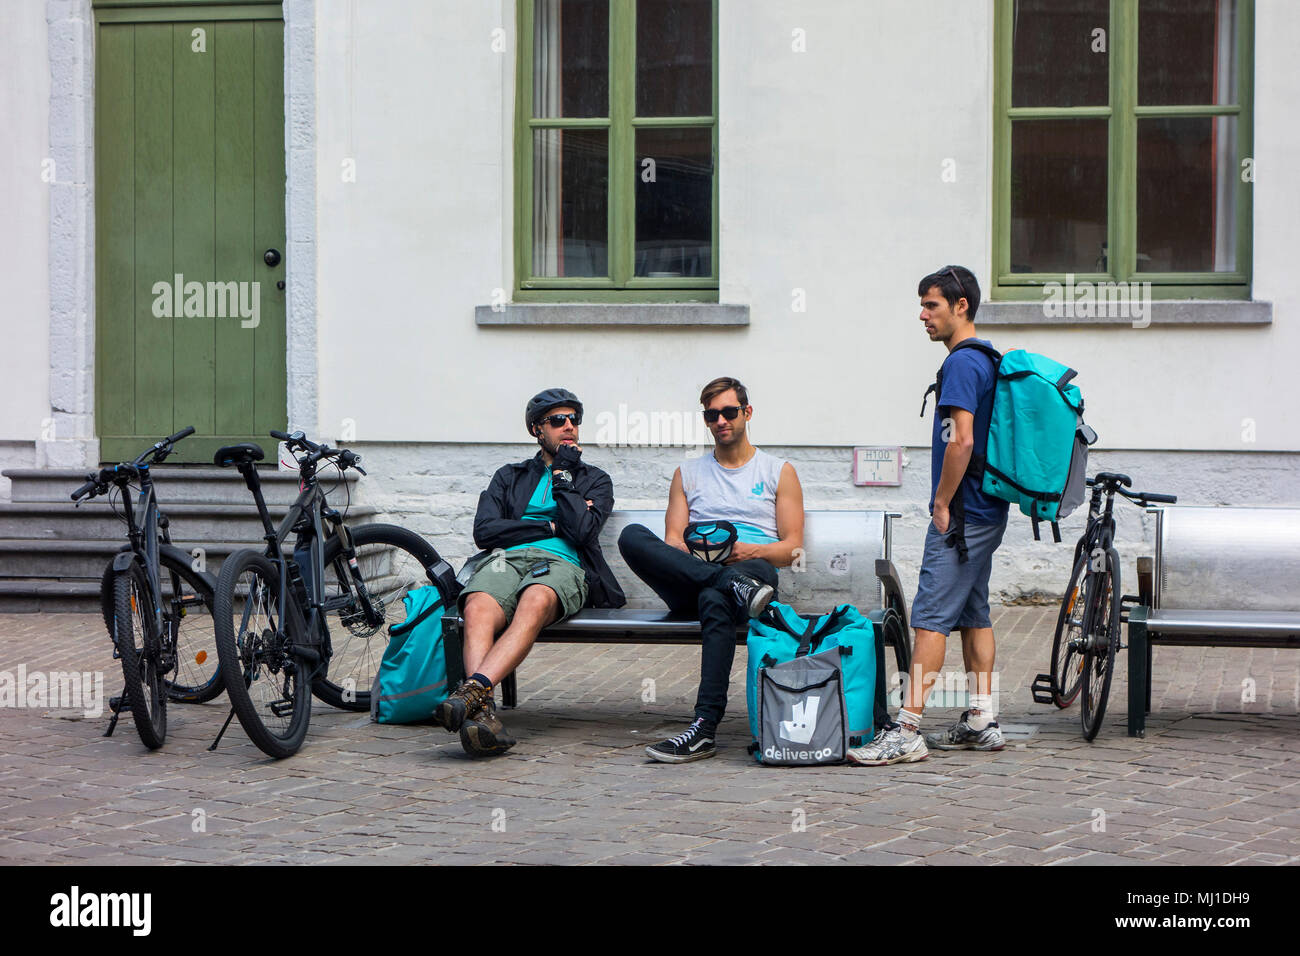 Bicycle couriers - working for Deliveroo, British online food delivery company - taking a break in city center Stock Photo